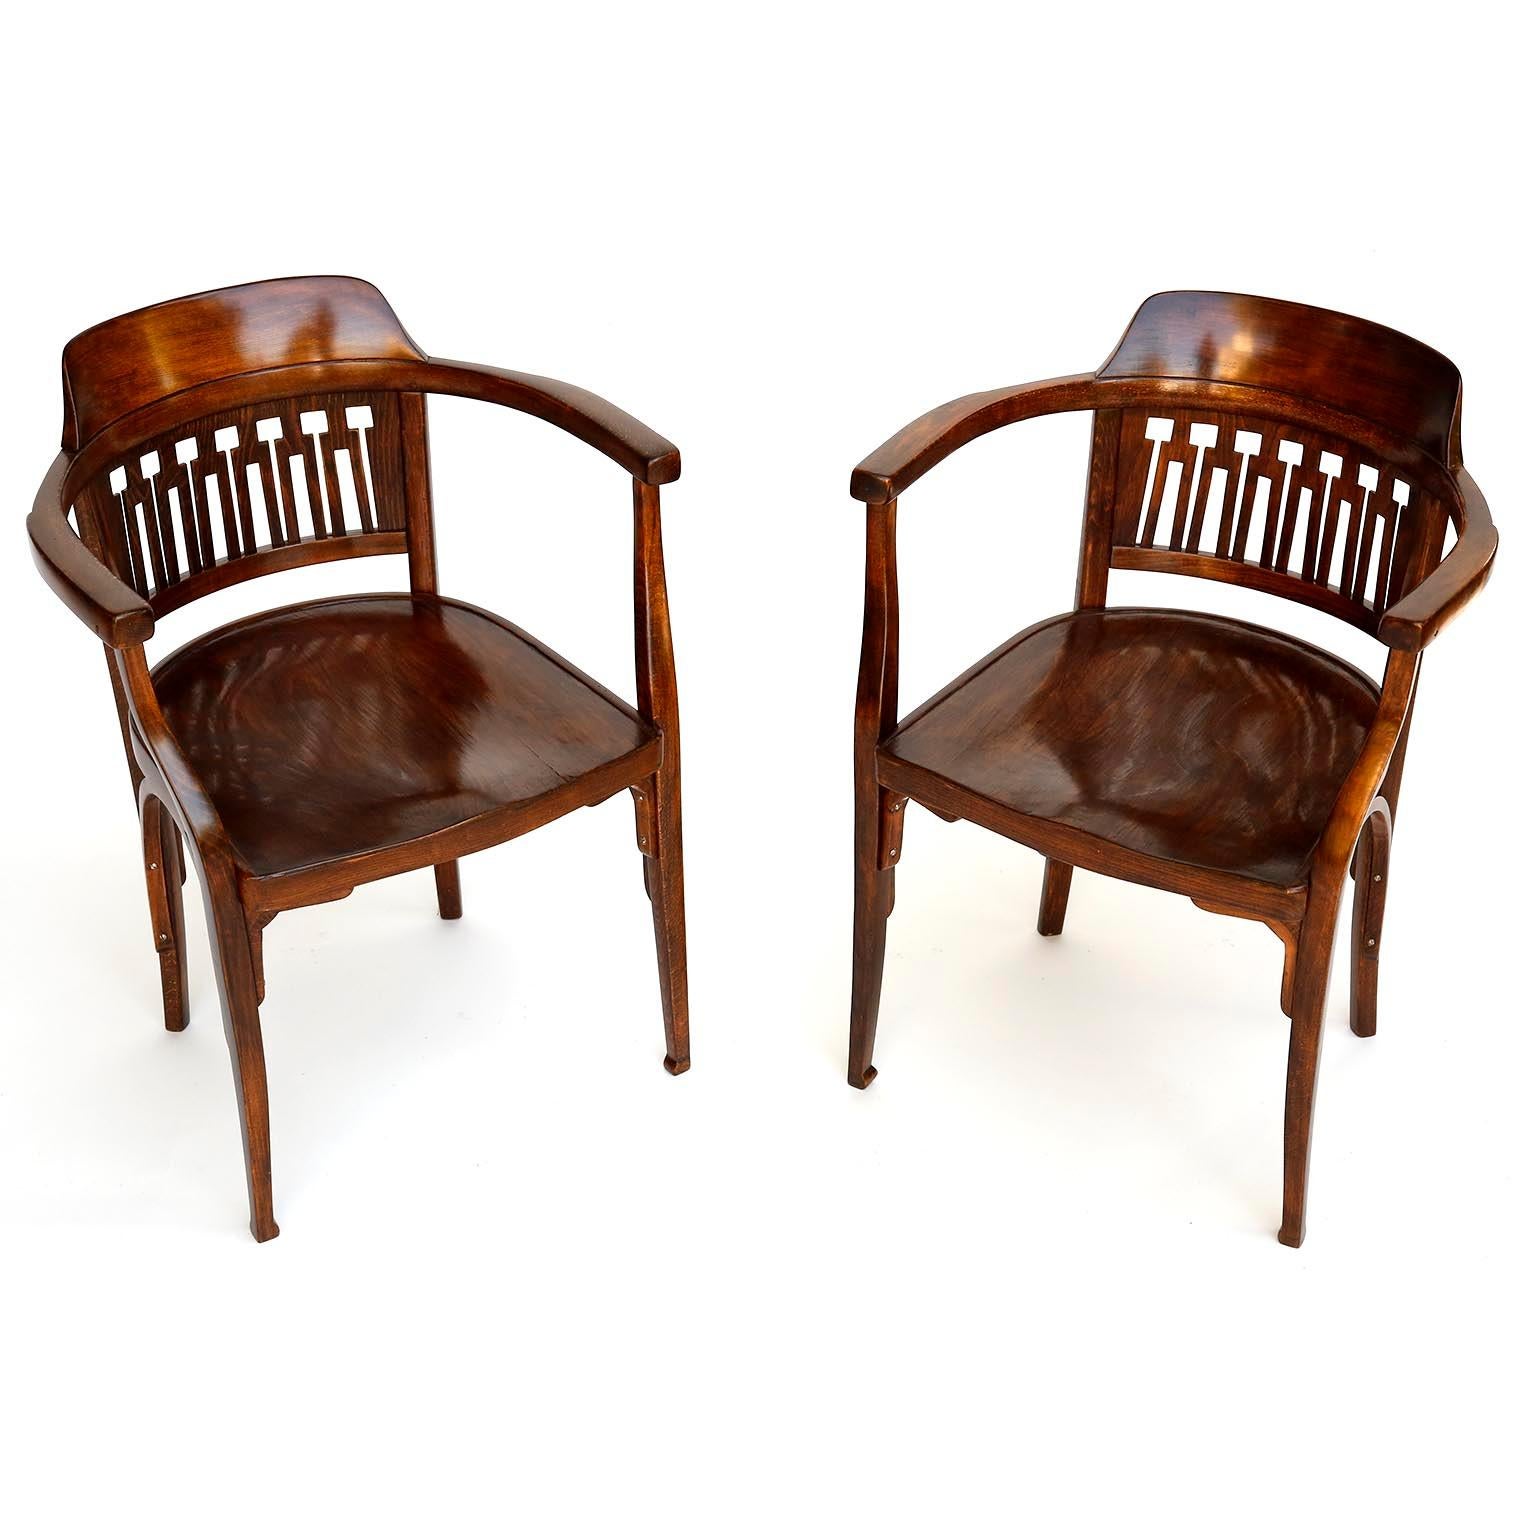 Austrian Pair of Otto Wagner Chairs Armchairs by J.&J. Kohn, Austria, Vienna Secession